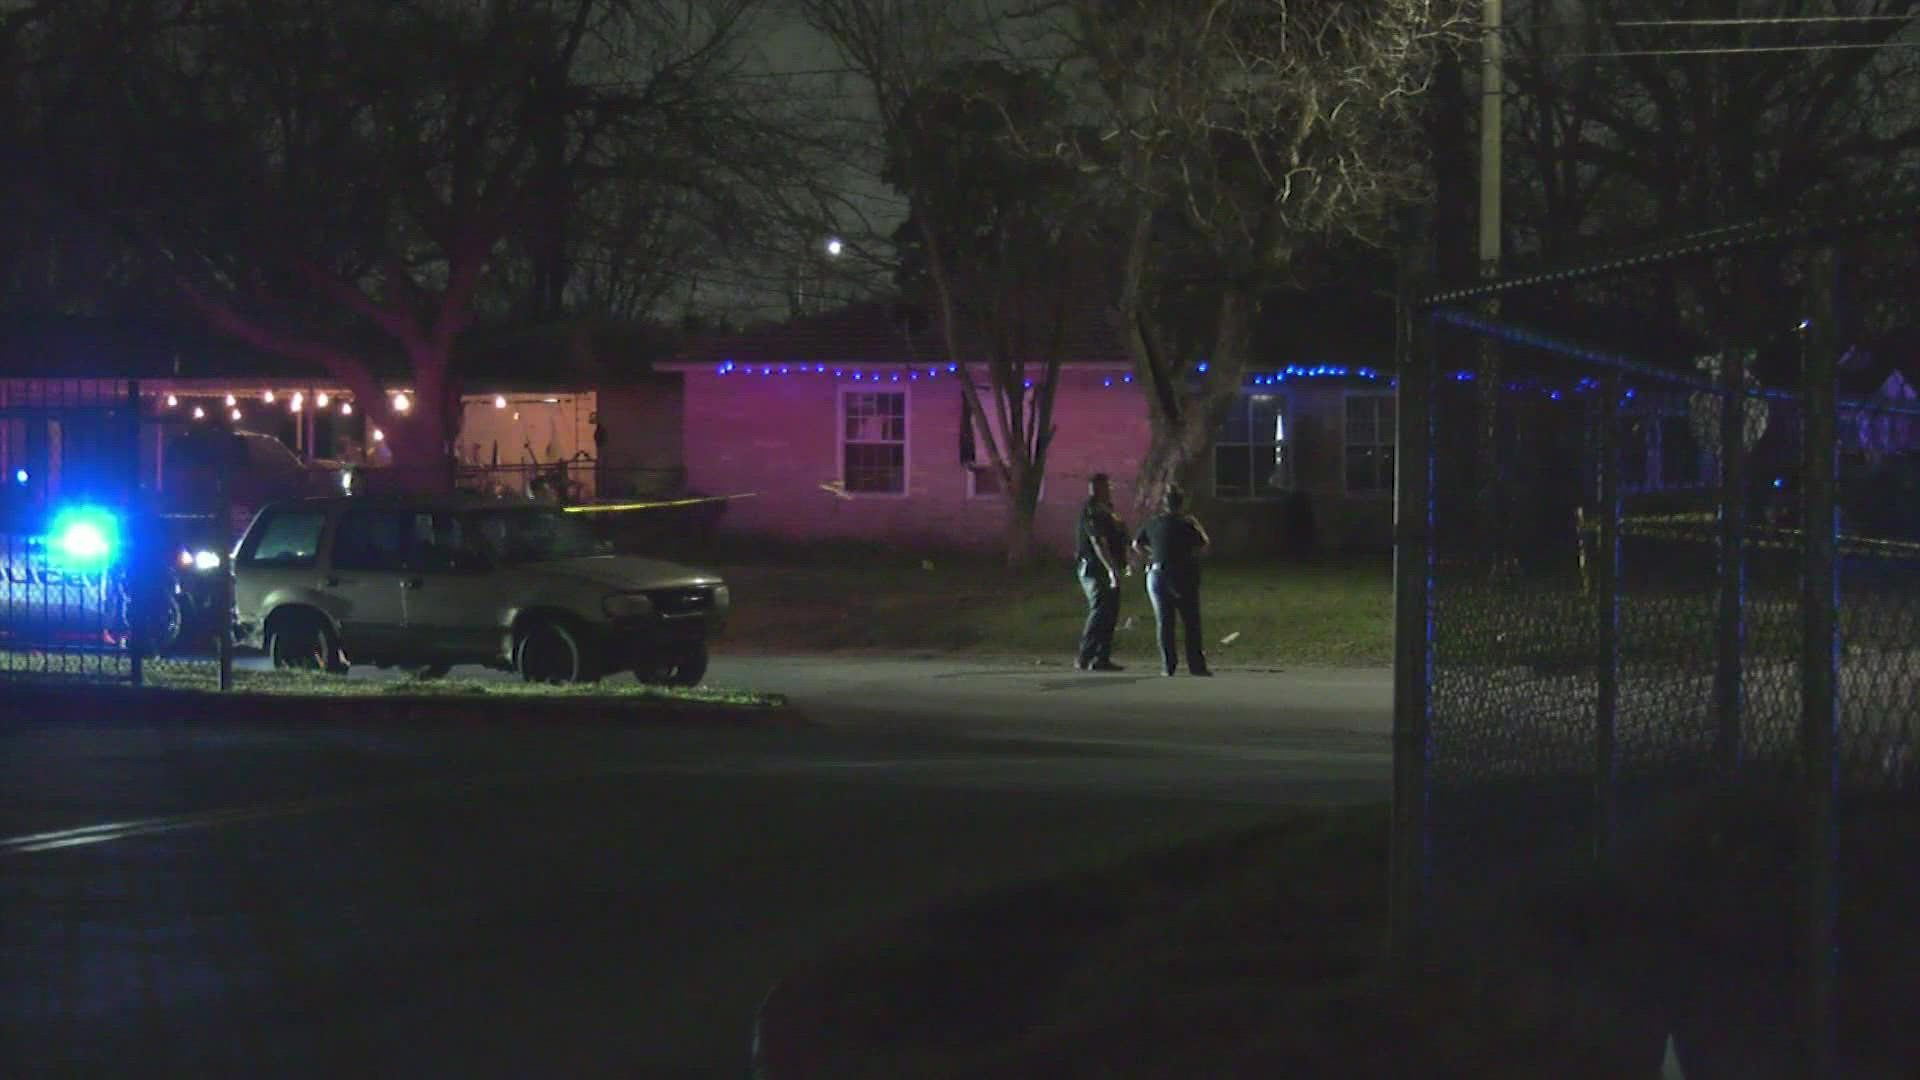 A man was stabbed to death in front of his girlfriend and her daughter outside of home on the north side Sunday night, according to police.